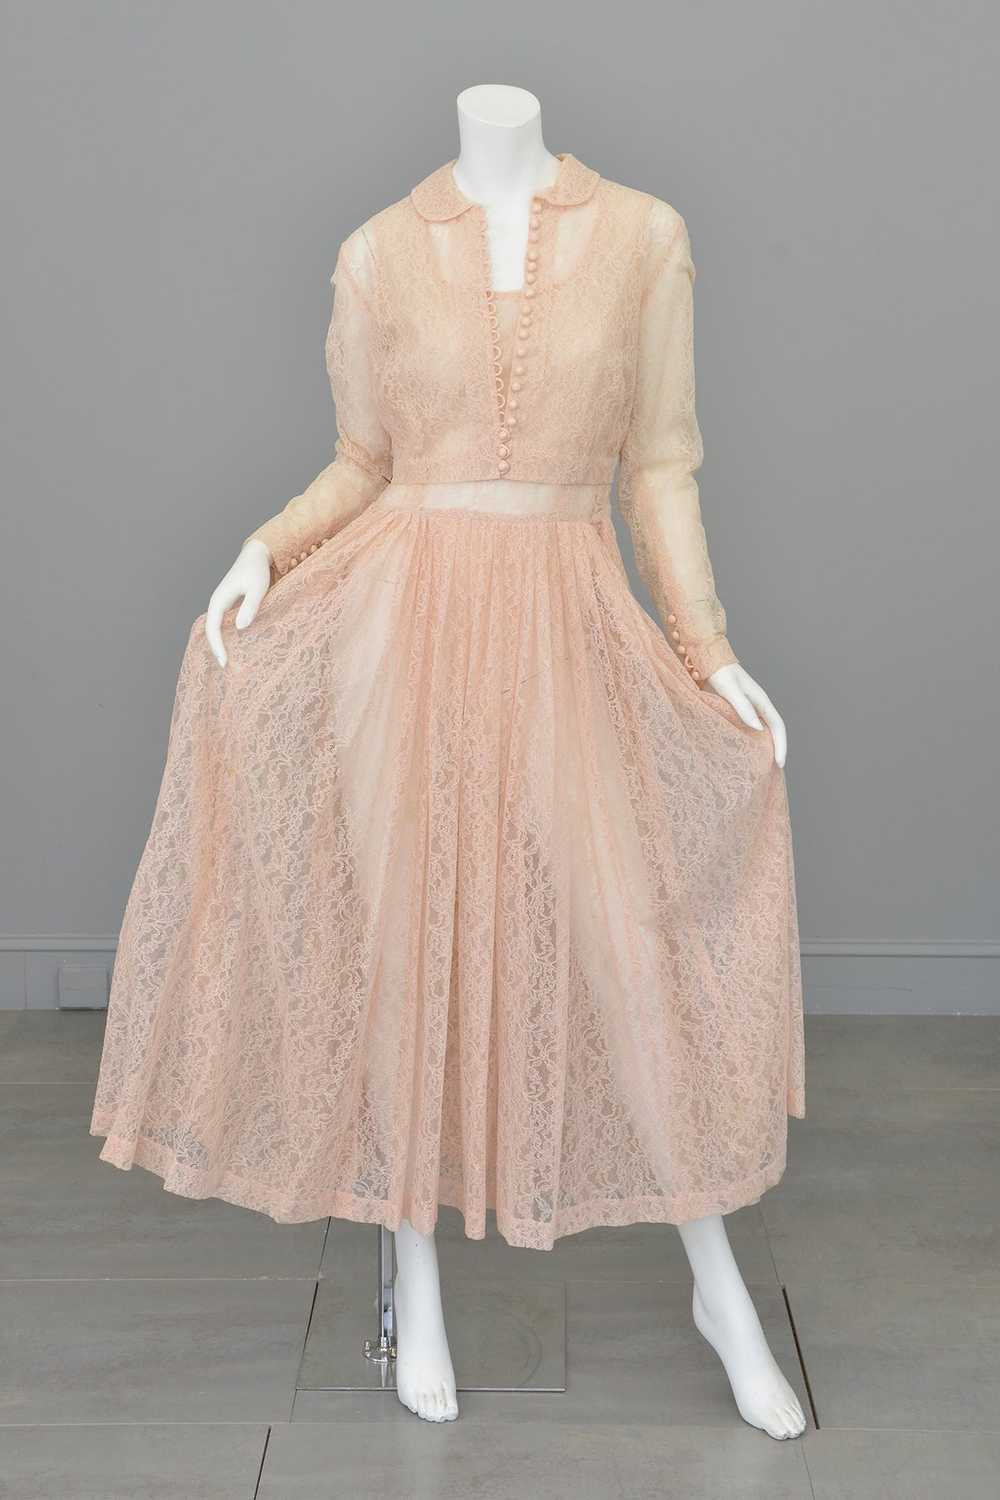 1940s 50s Sheer Light Pink Embroidered Lace Gown - image 2